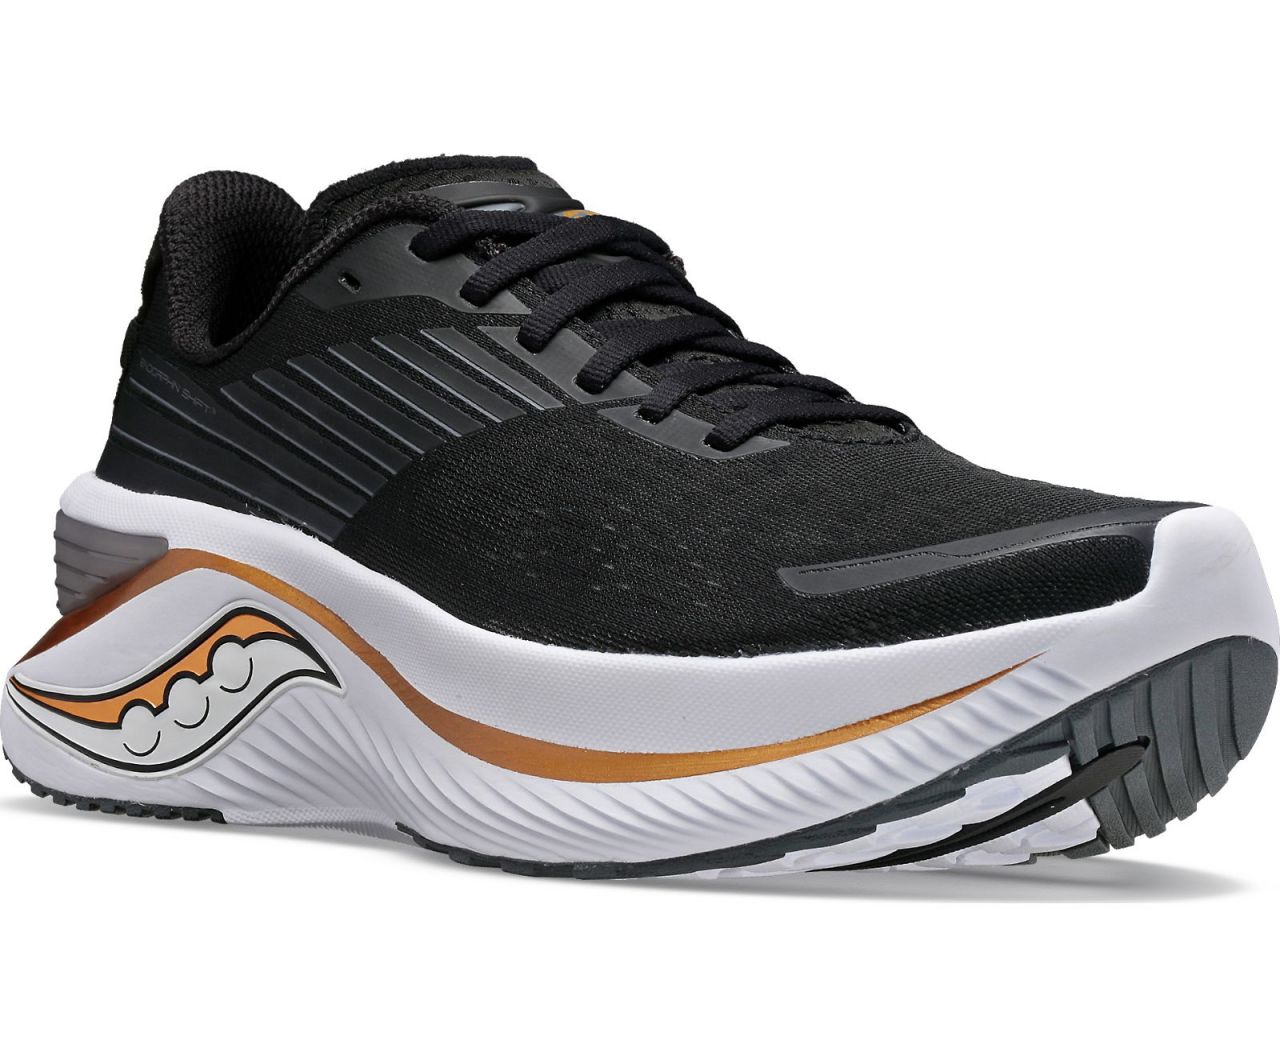 SAUCONY ENDORPHIN SHIFT 3 BLACK ET GOLD Chaussures running saucony